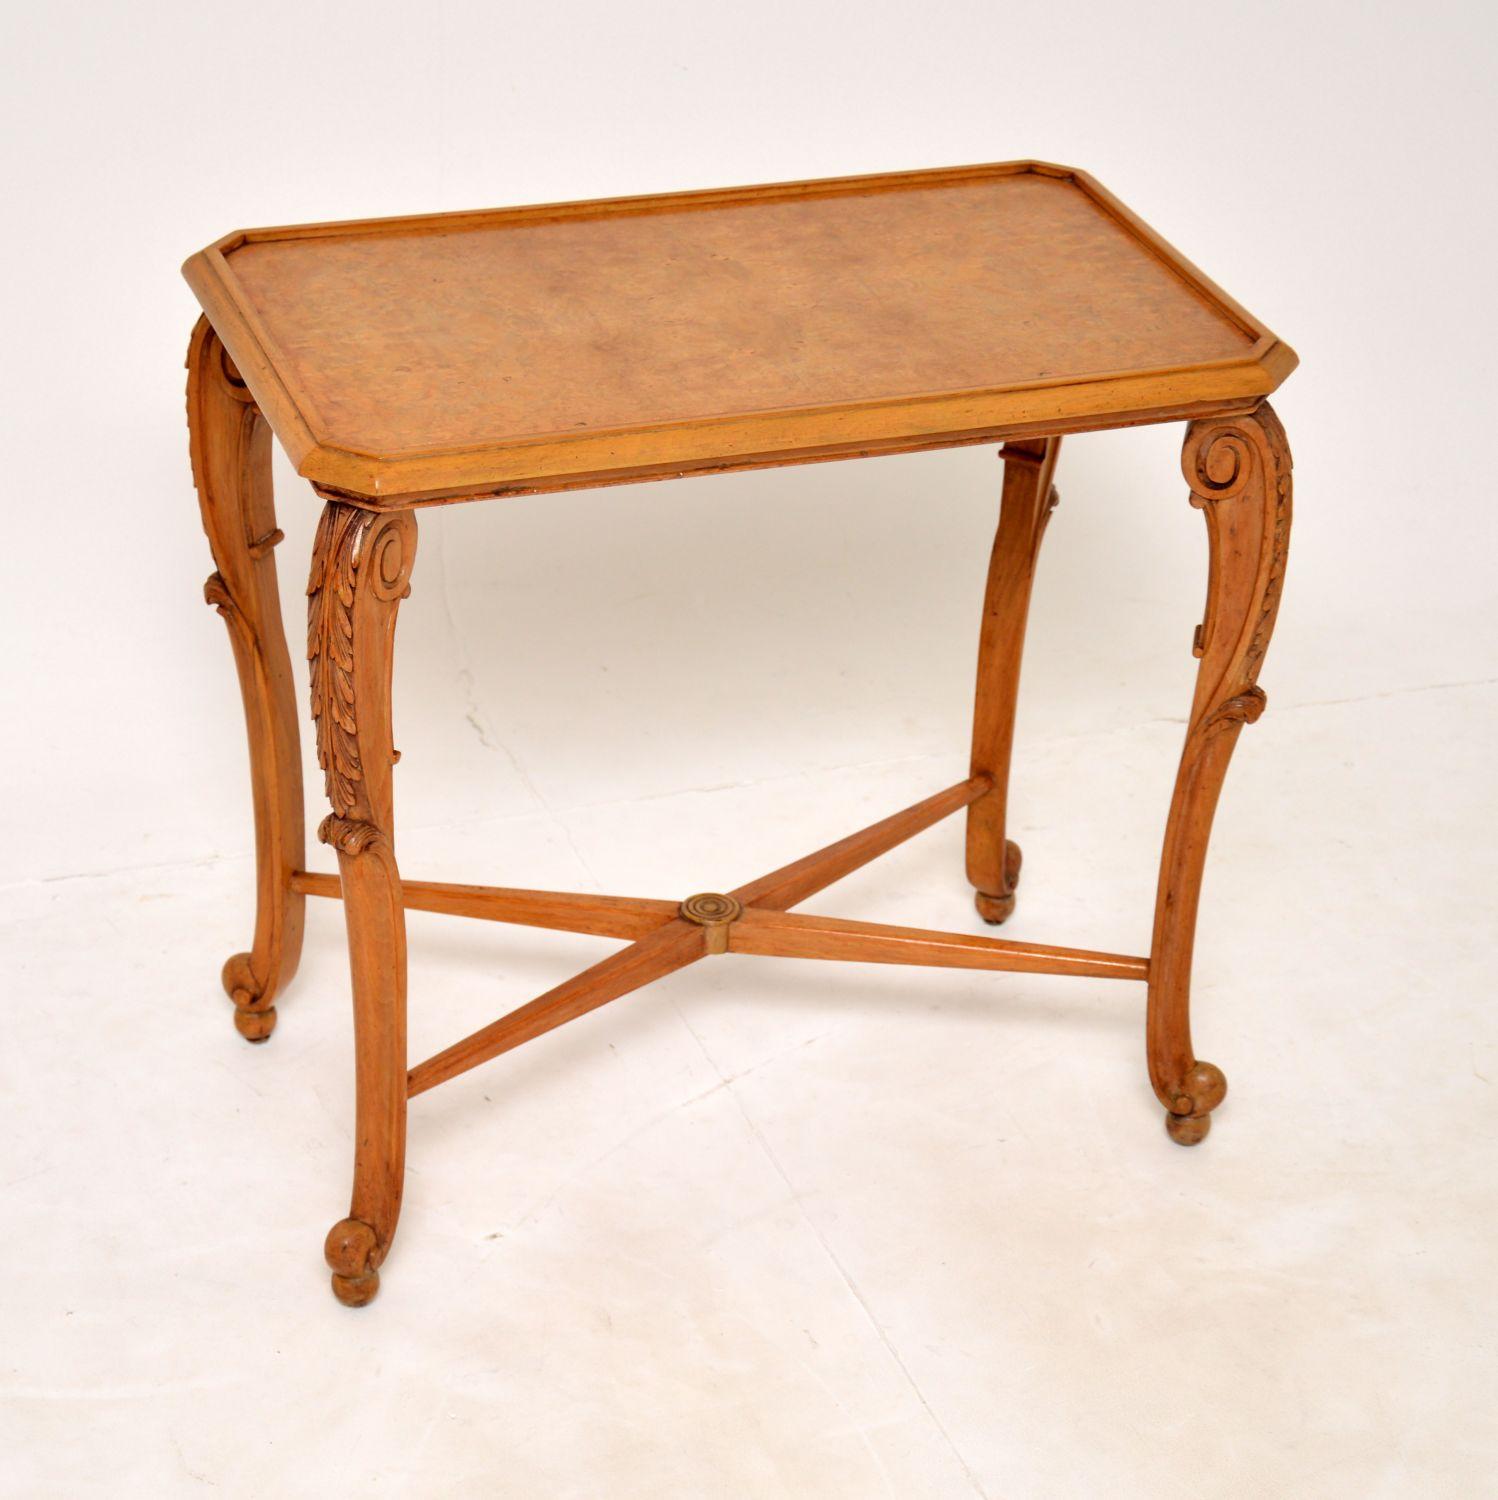 A lovely antique side table in burr walnut and carved walnut. This was made in England by Ray and Solomon Hille, it dates from the 1930’s.

It is beautifully made and is a useful size for use as an occasional side table or lamp table. There is a